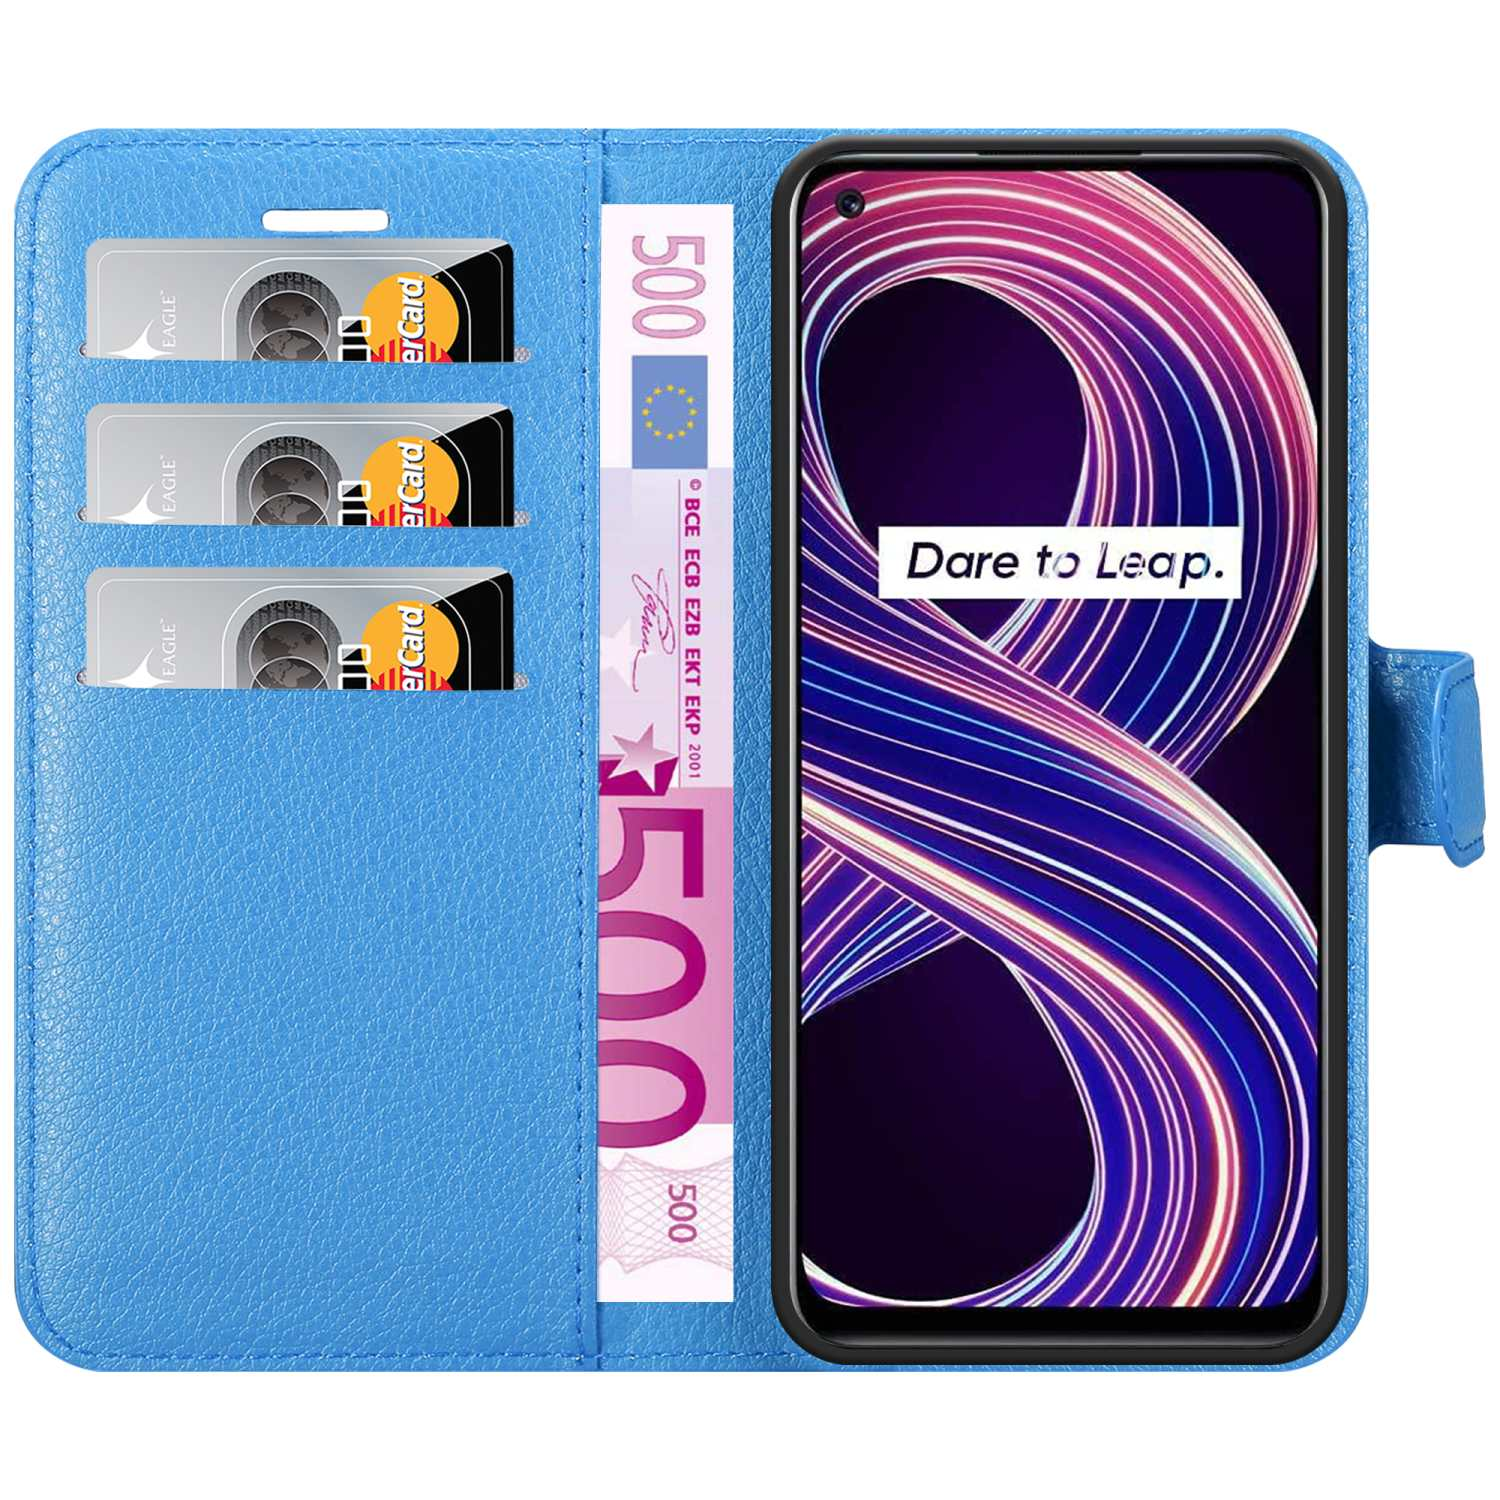 Bookcover, / 30 8 / / 5G, Q3i BLAU Q3 PASTELL Narzo V13 / Standfunktion, Hülle Book Realme, 5G CADORABO